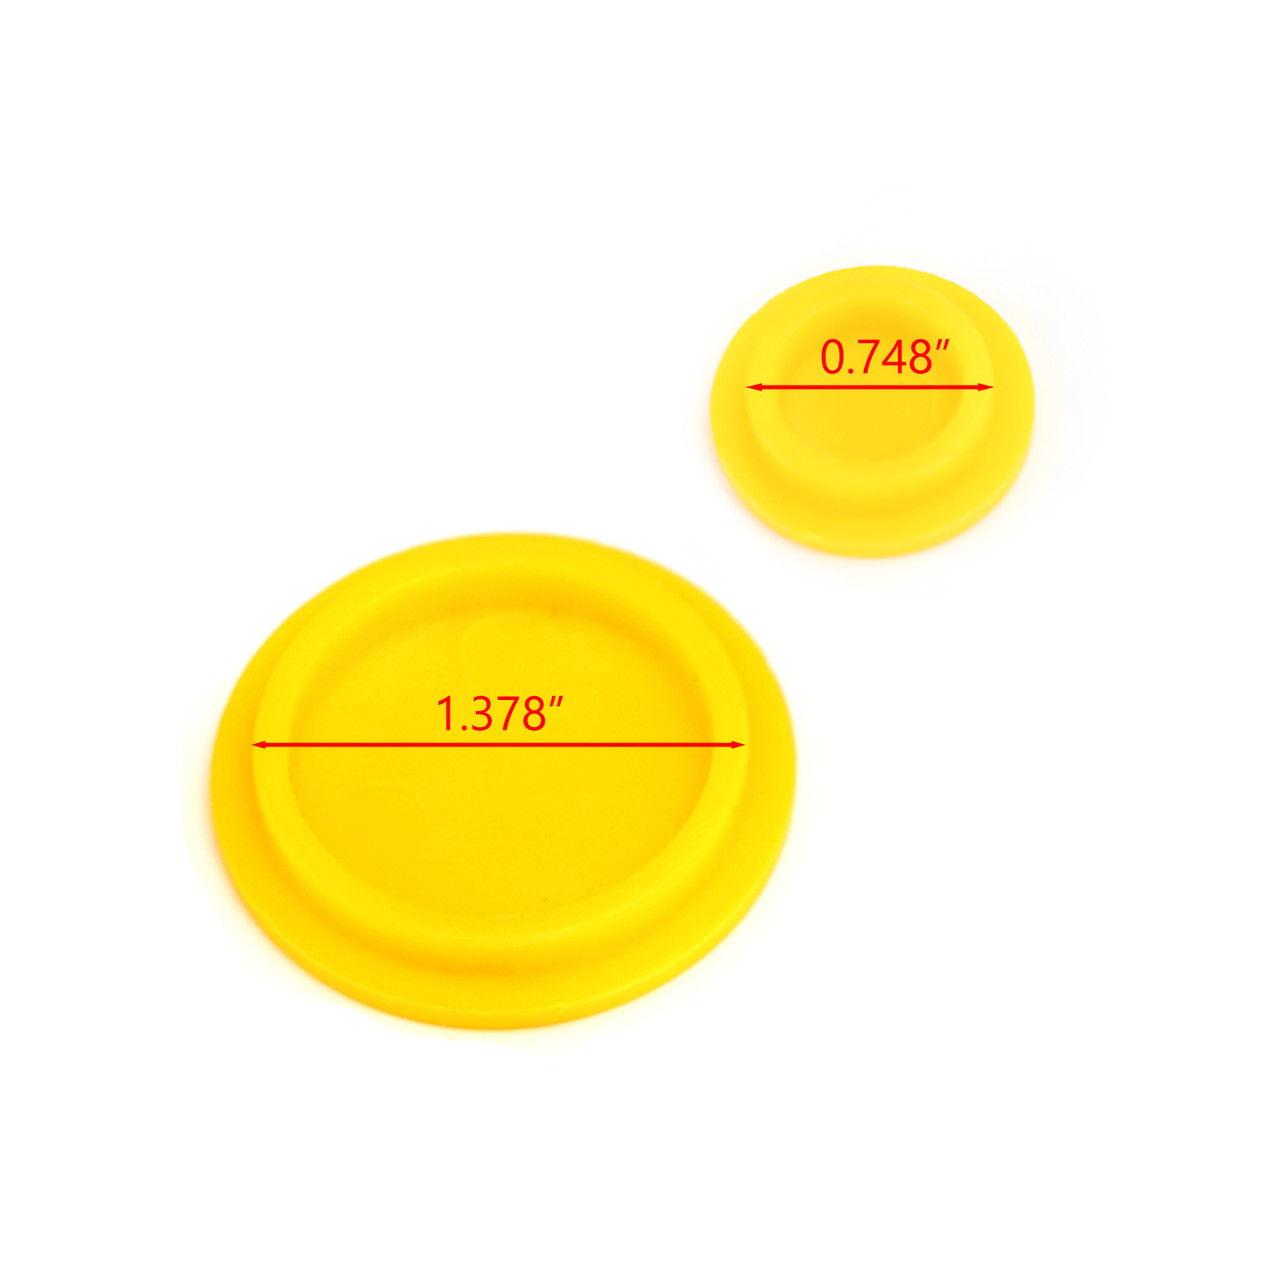 Grease Caps for John Deere 1023E 1025R 2025R Compact Tractor 120 Loader Yellow,Yellow Grease Caps For John Deere 1023E 1025R 2025R Compact Tractor 120 Loader,Compact Tractor 120 Loader Fitting Grease Caps For John Deere 1023E 1025R 1025R